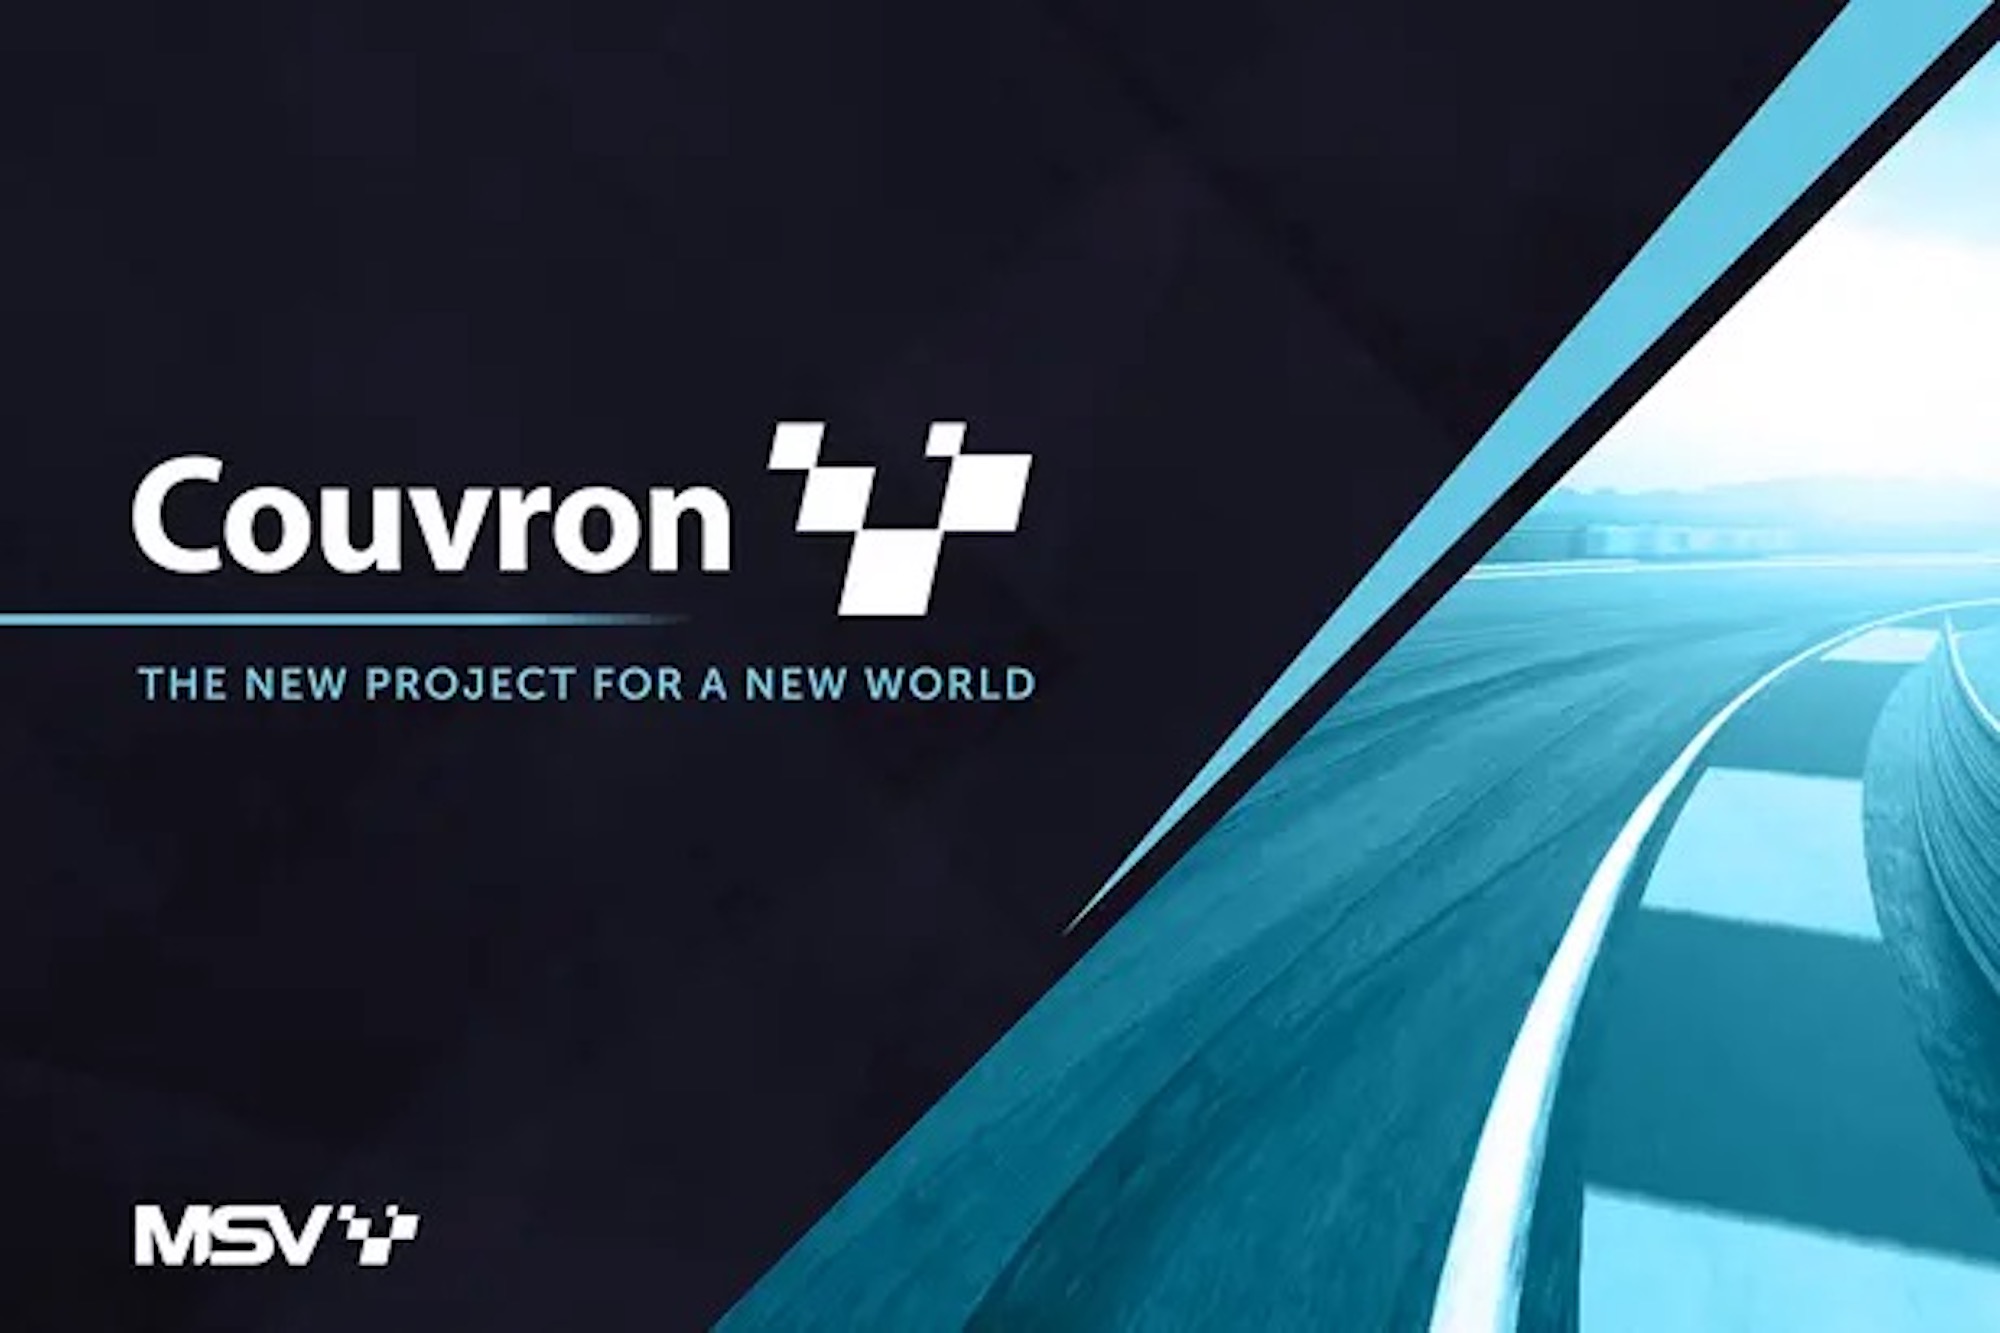 Couvron's logo, in relation to the new eco race track designed and built in France by MotorSport Vision (MSV). Media sourced from MCN.